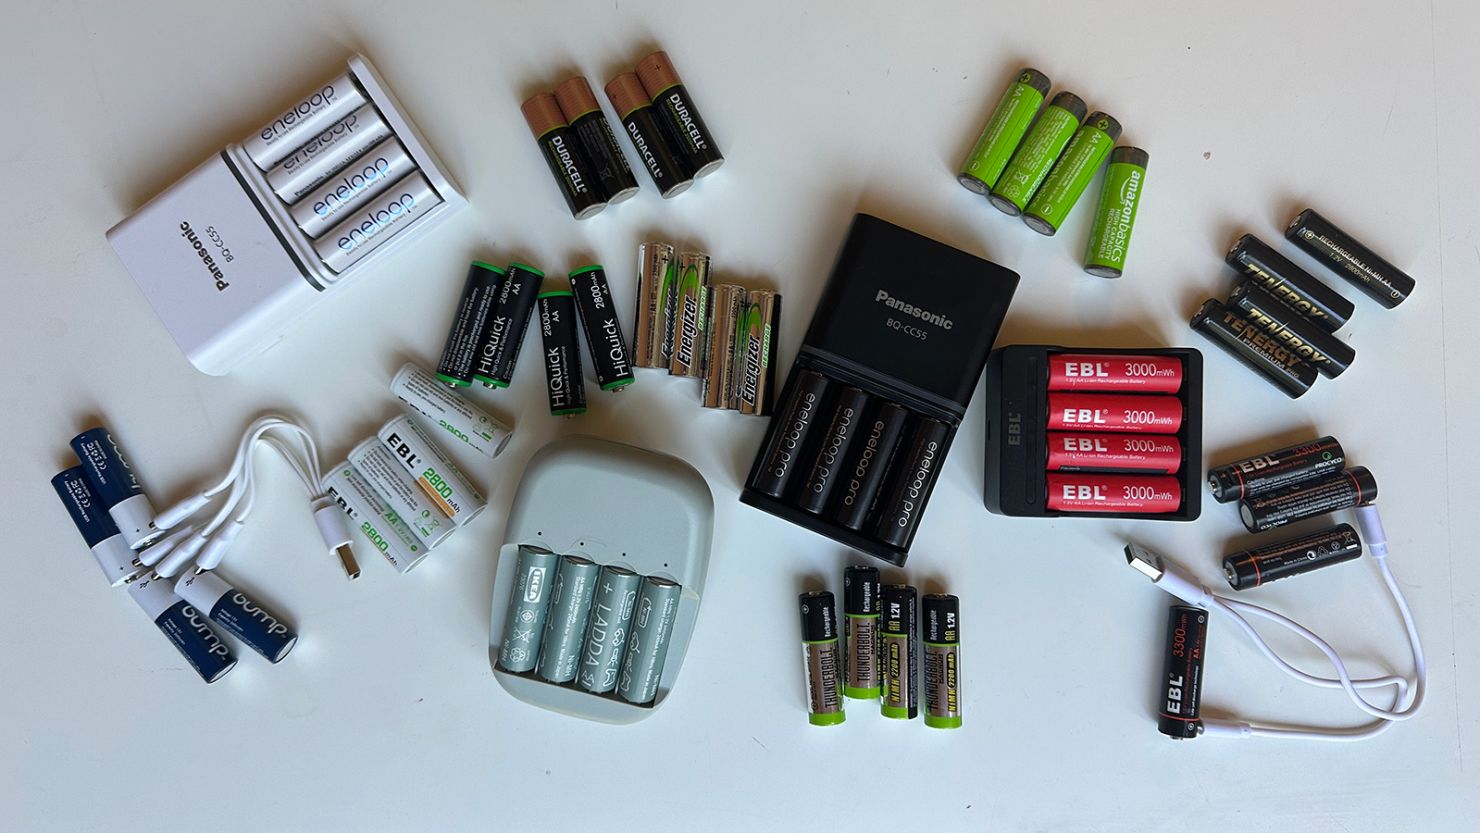 Pack 4 piles AA rechargeables USB